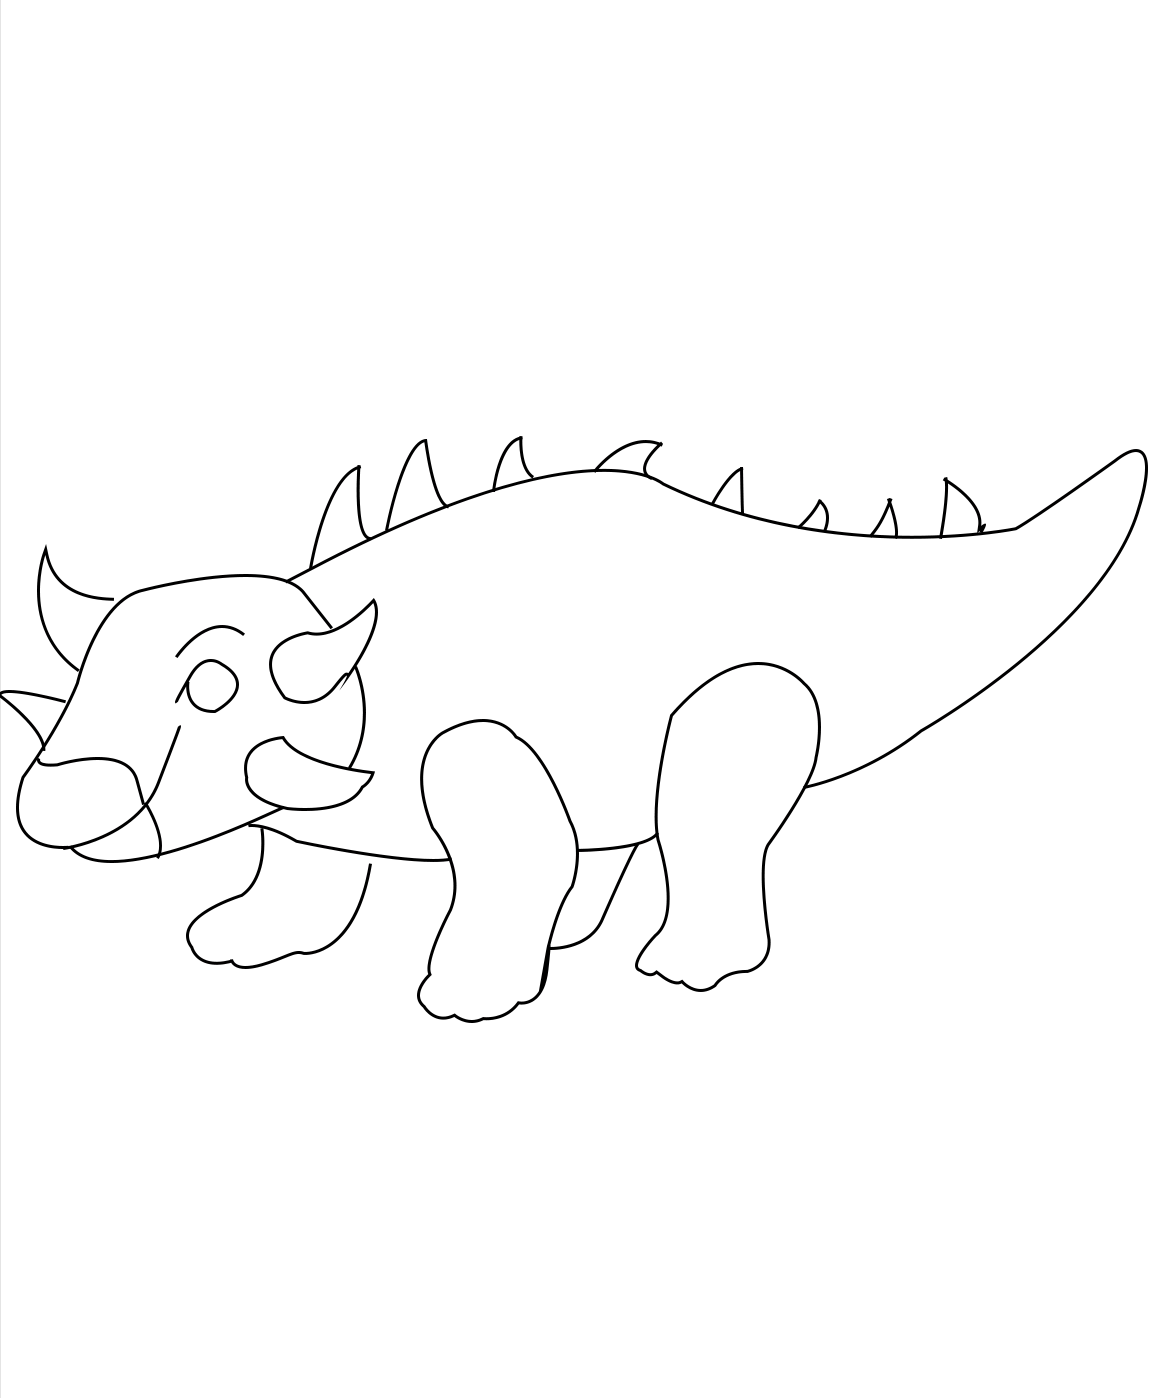 euoplocephalus coloring pages for kids